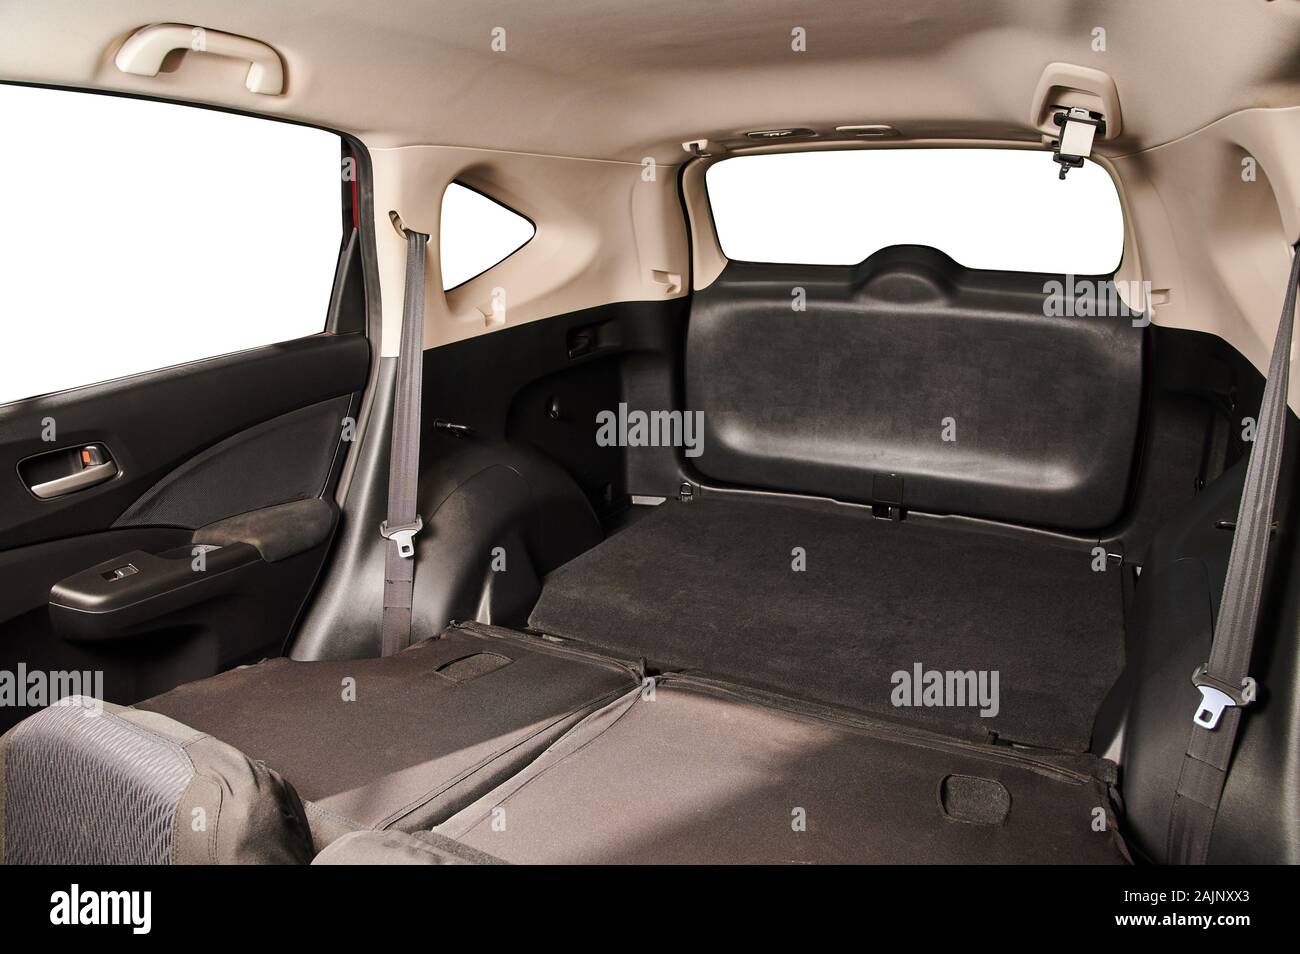 Big clean trunk of SUV car inside view isolated Stock Photo